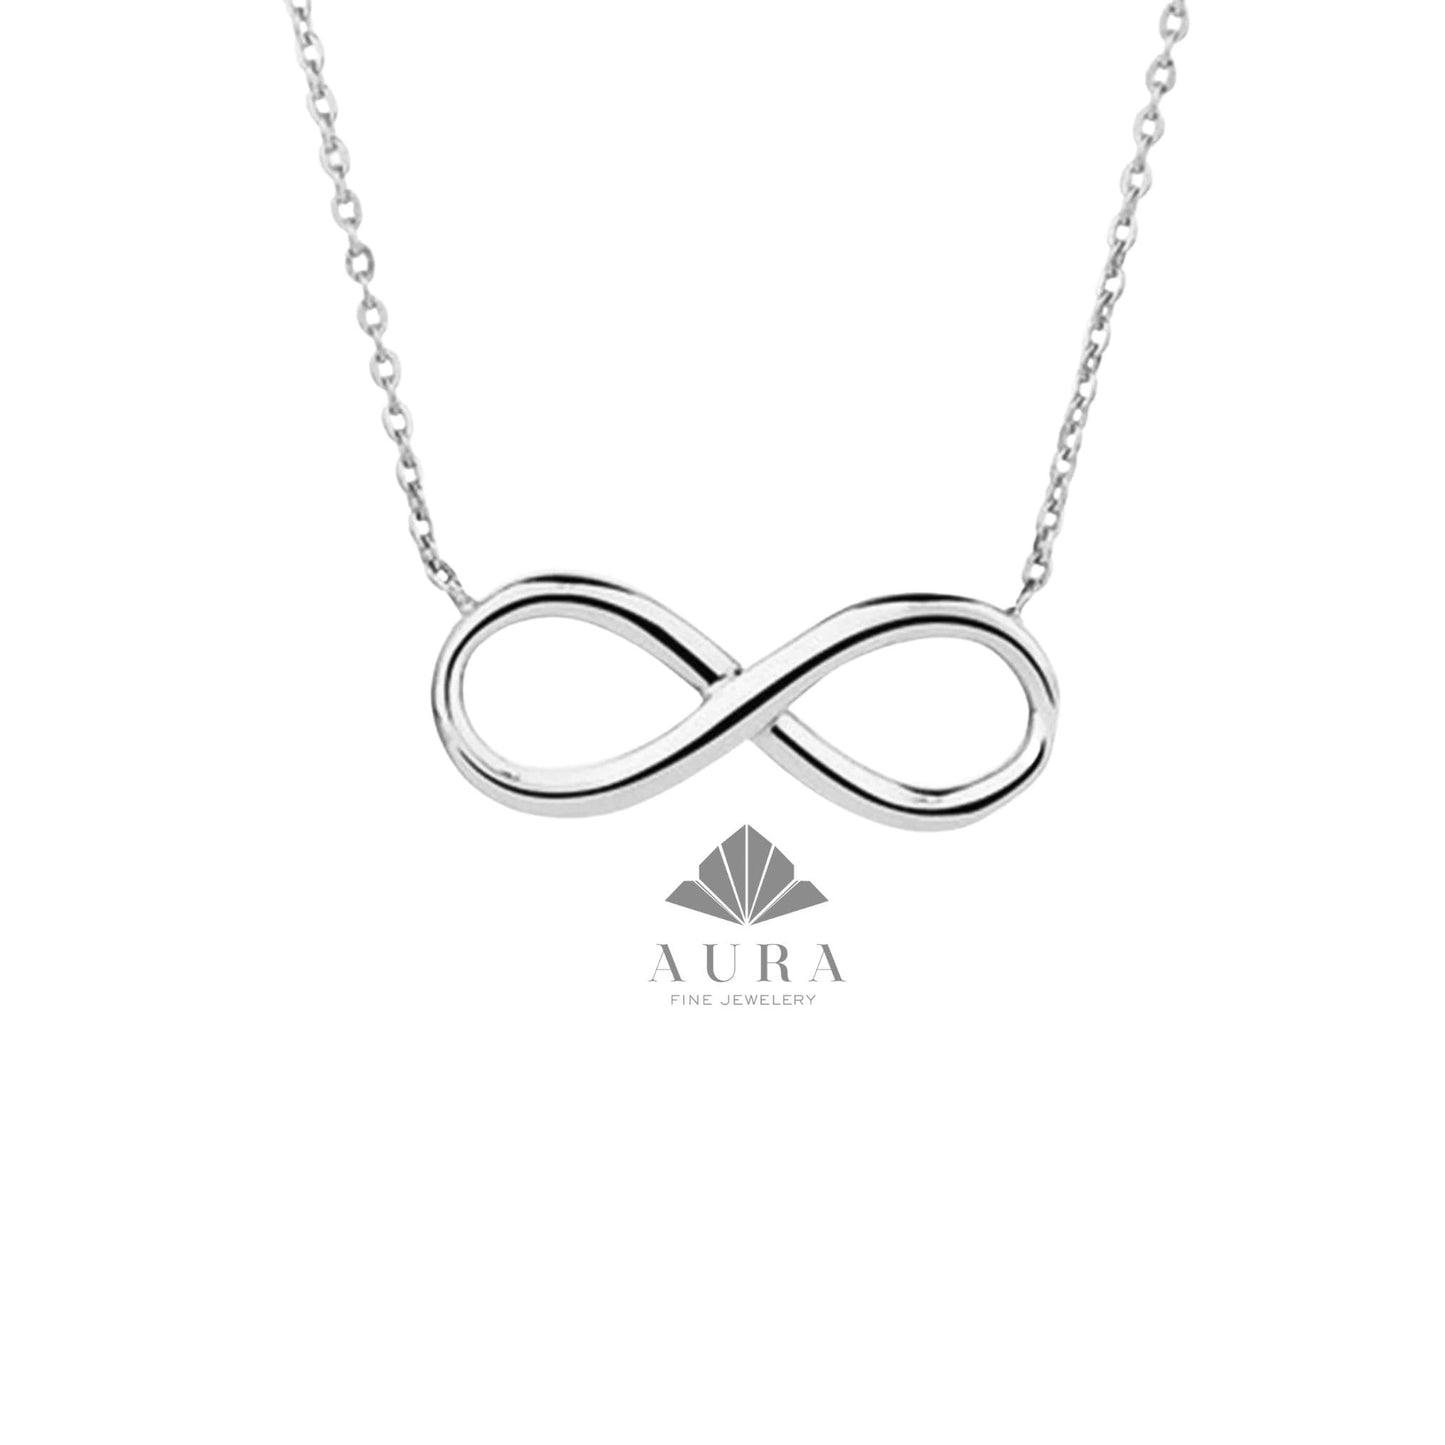 14K Gold Infinity Necklace, Infinity Pendant, Eternity Necklace, Infinite Love Necklace, Valentines Day Gift, Friendship Necklace